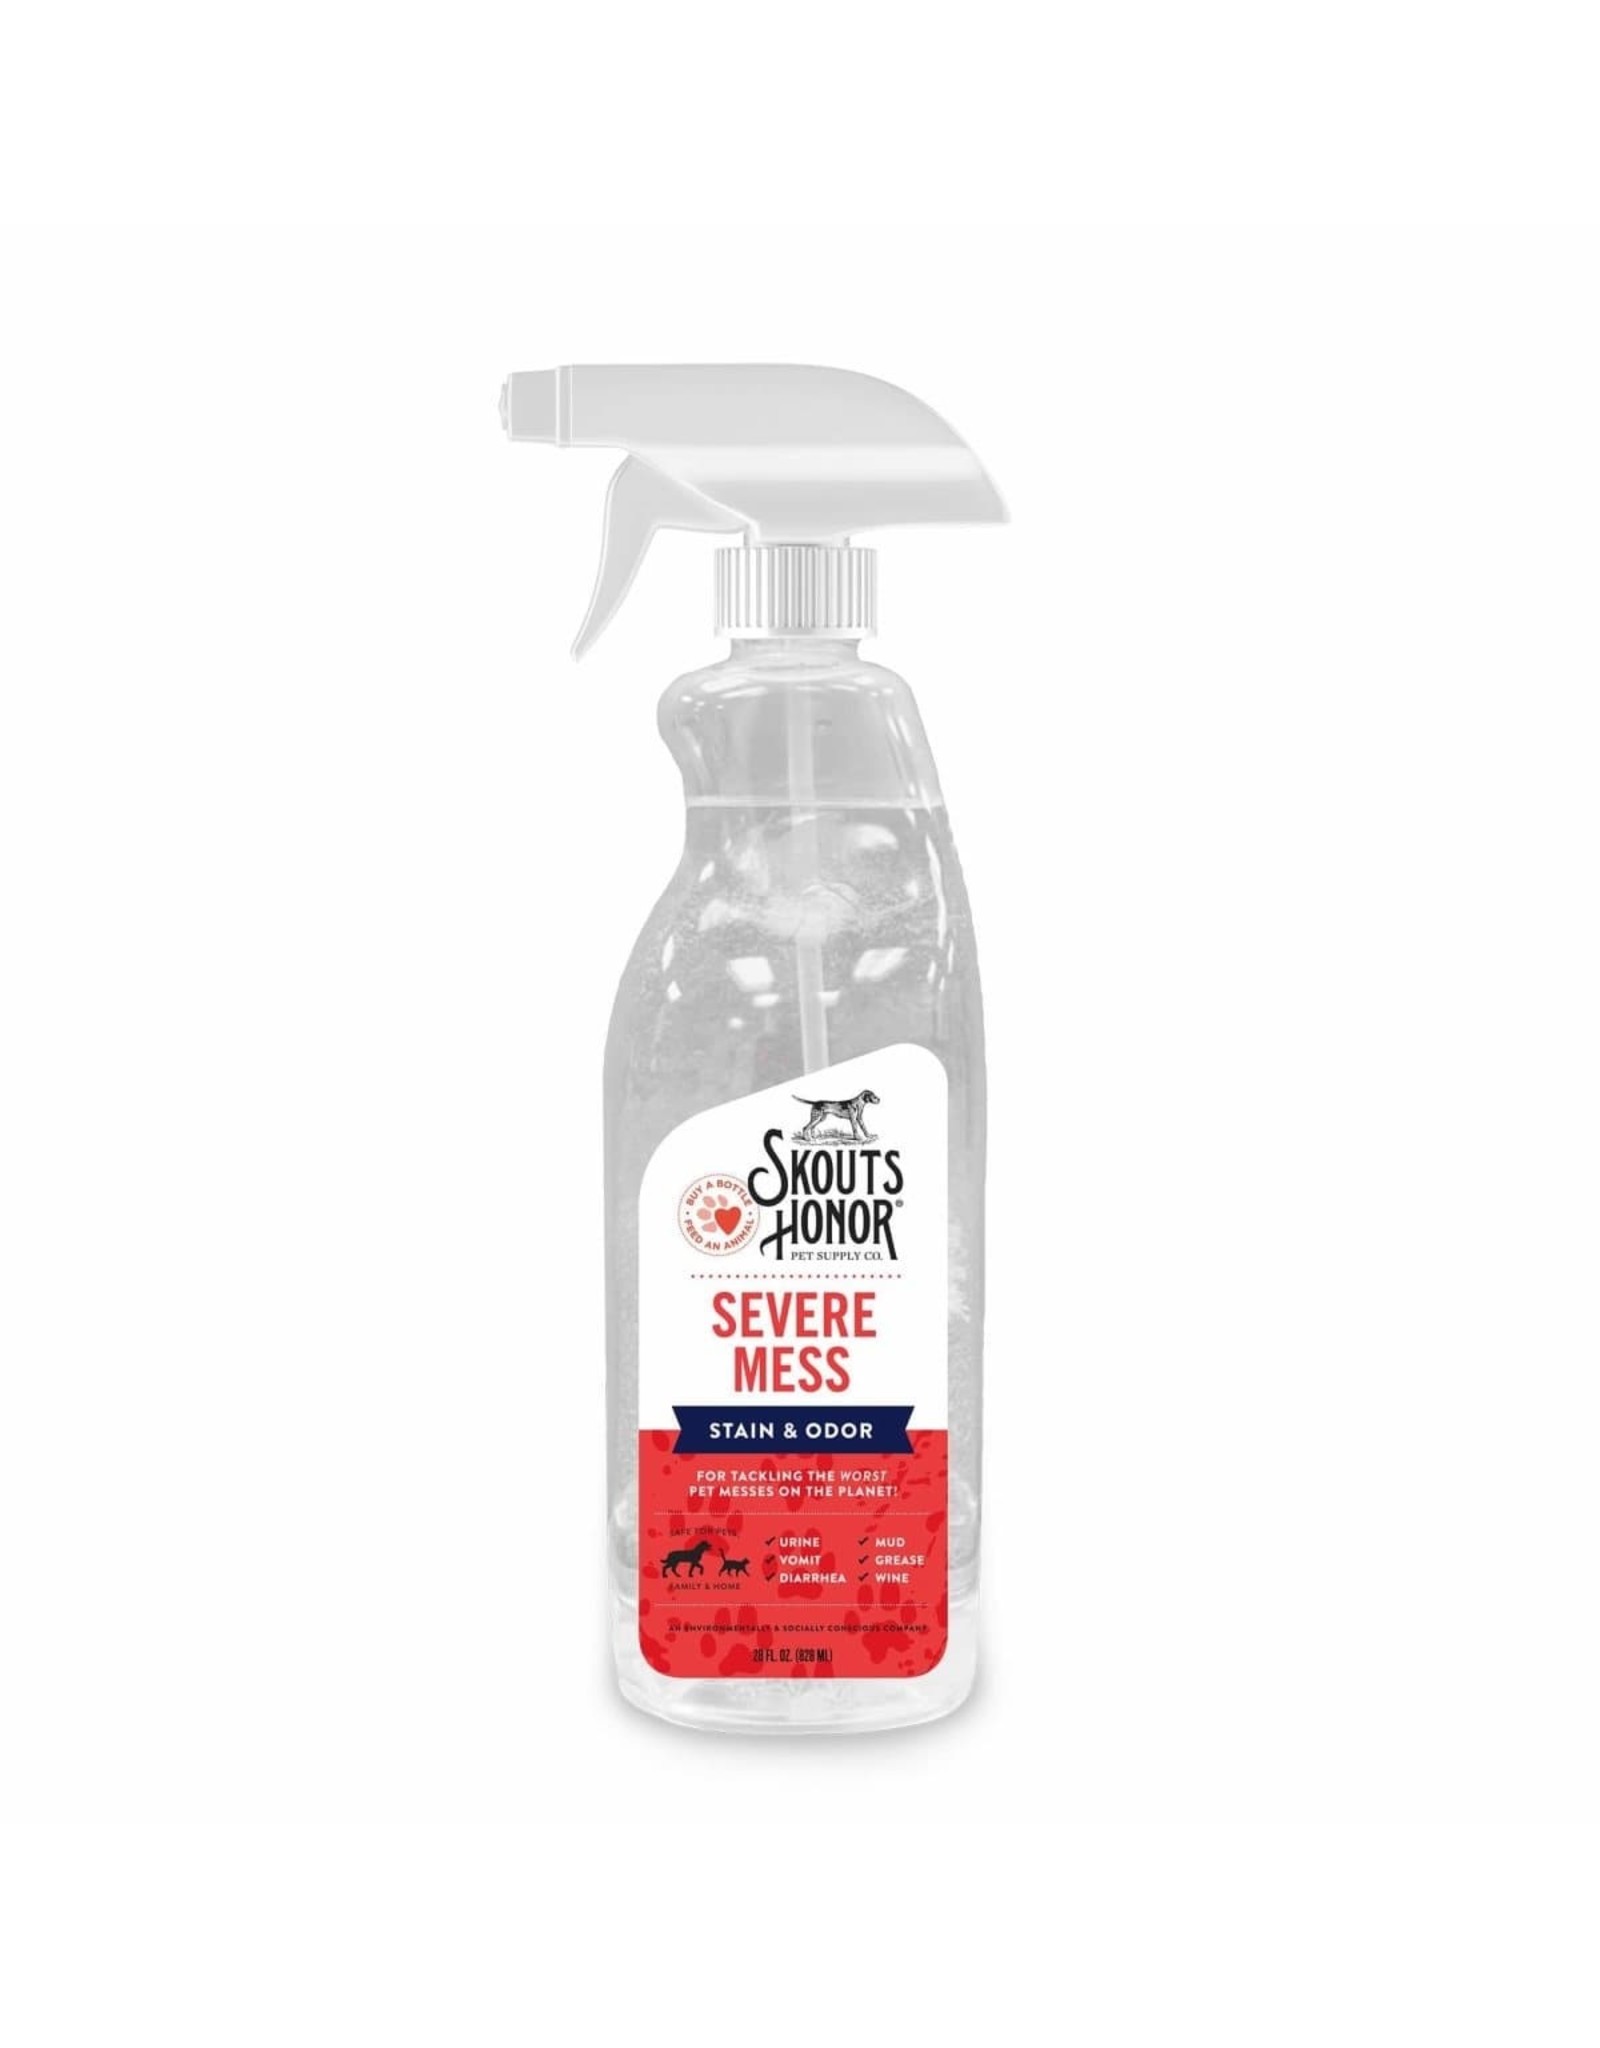 Skout's Honor Severe Mess Stain & Odor Remover, 28oz